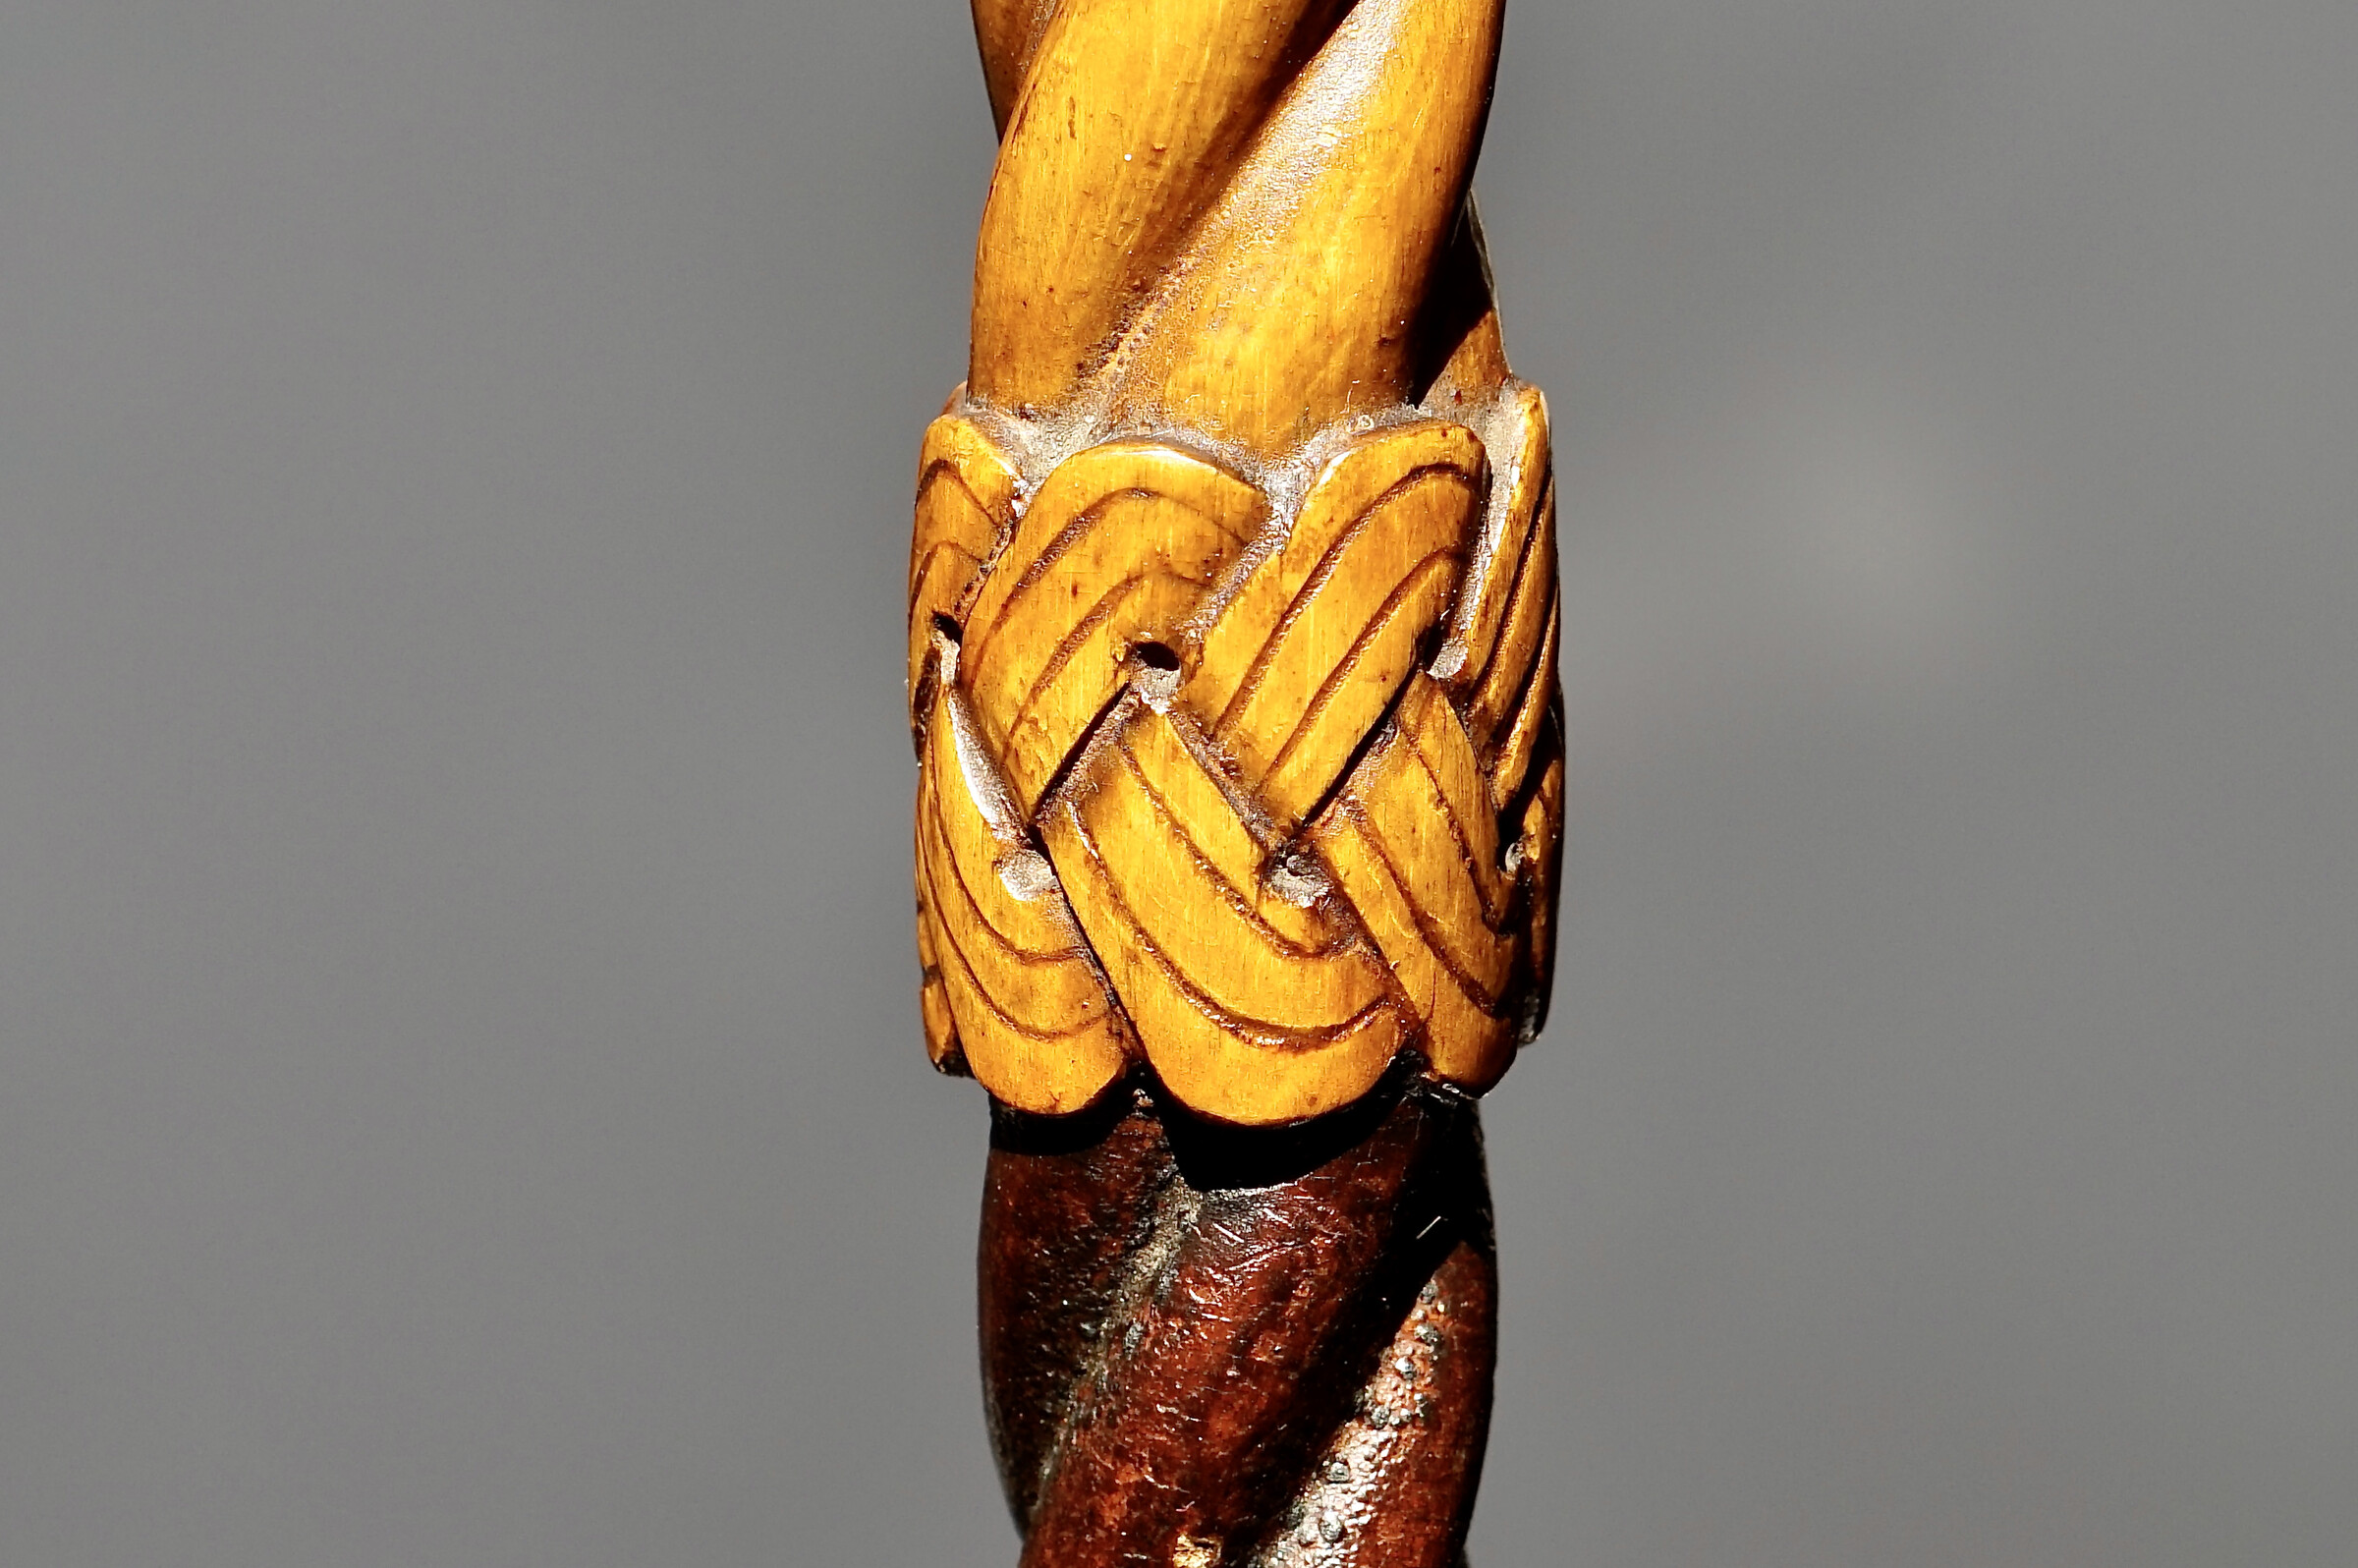 Whalers Art, One-piece of wood Walking stick, U.S.A. or England ca. 1880